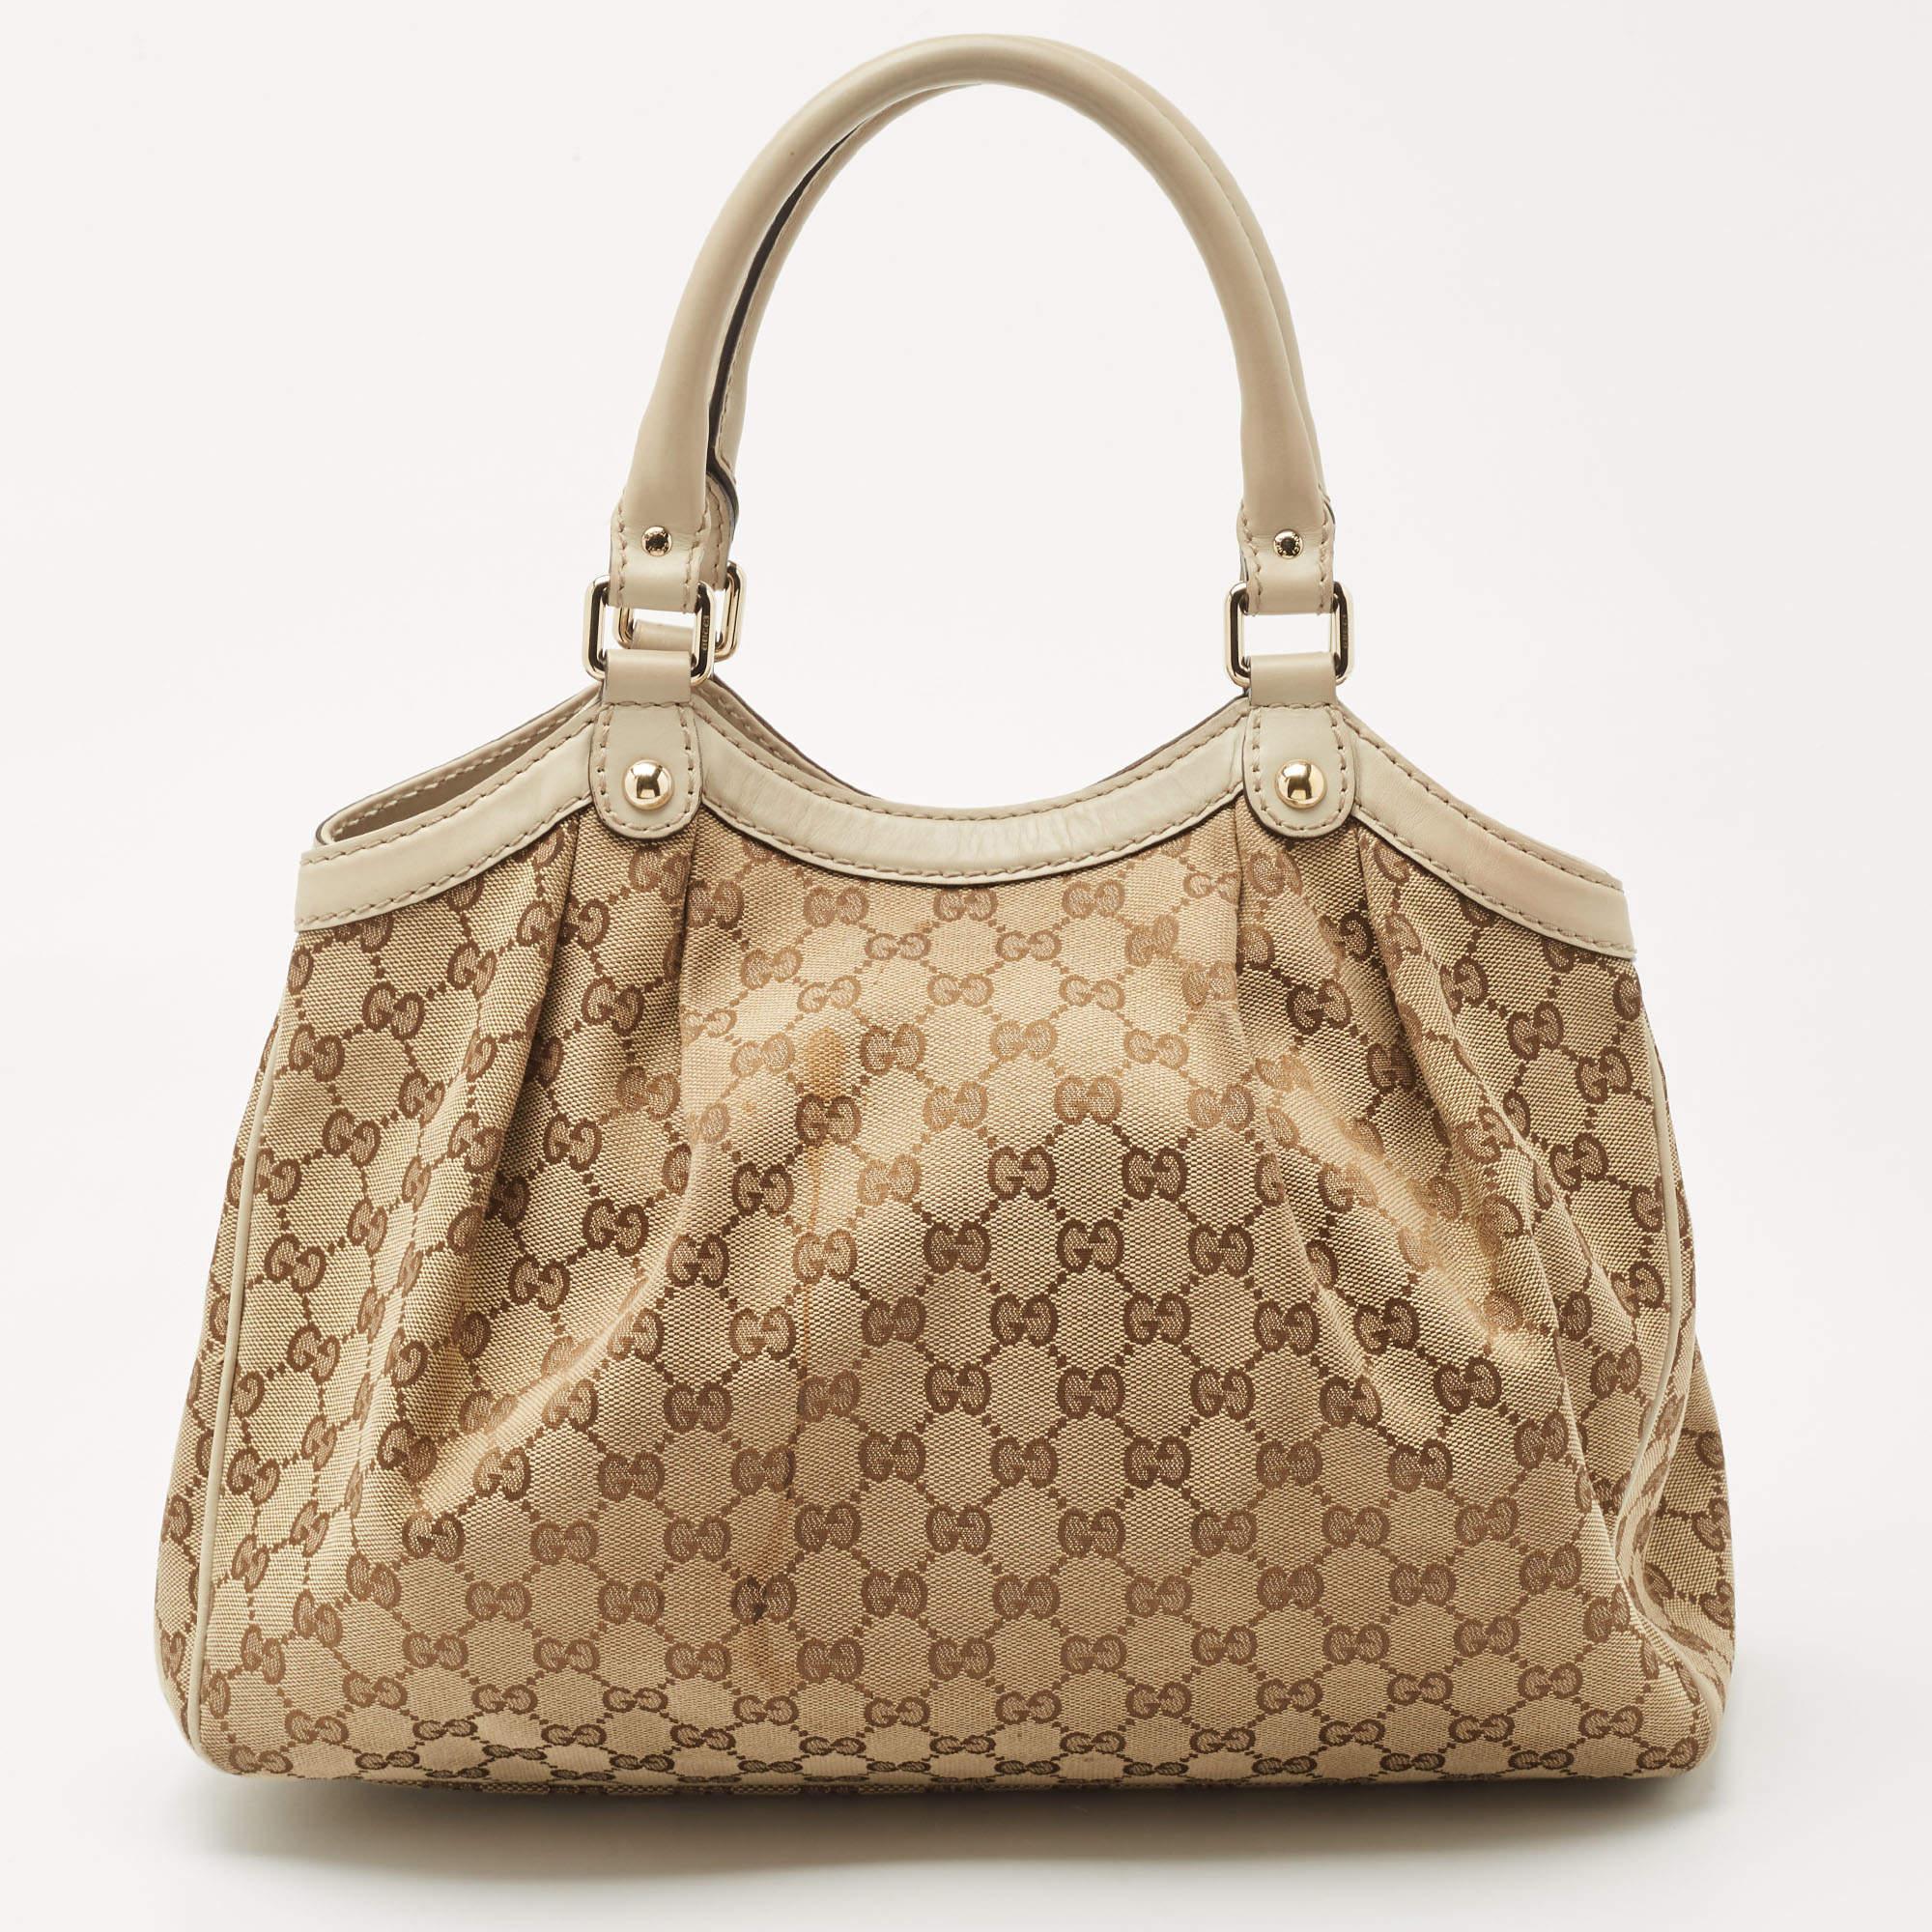 Enriched with signature details, this Sukey hobo from Gucci will surely win your vote as a favorite. It comes crafted from GG canvas and leather and flaunts dual handles at the top, a branded charm, and neat pleats. Lined with fabric, it is capable